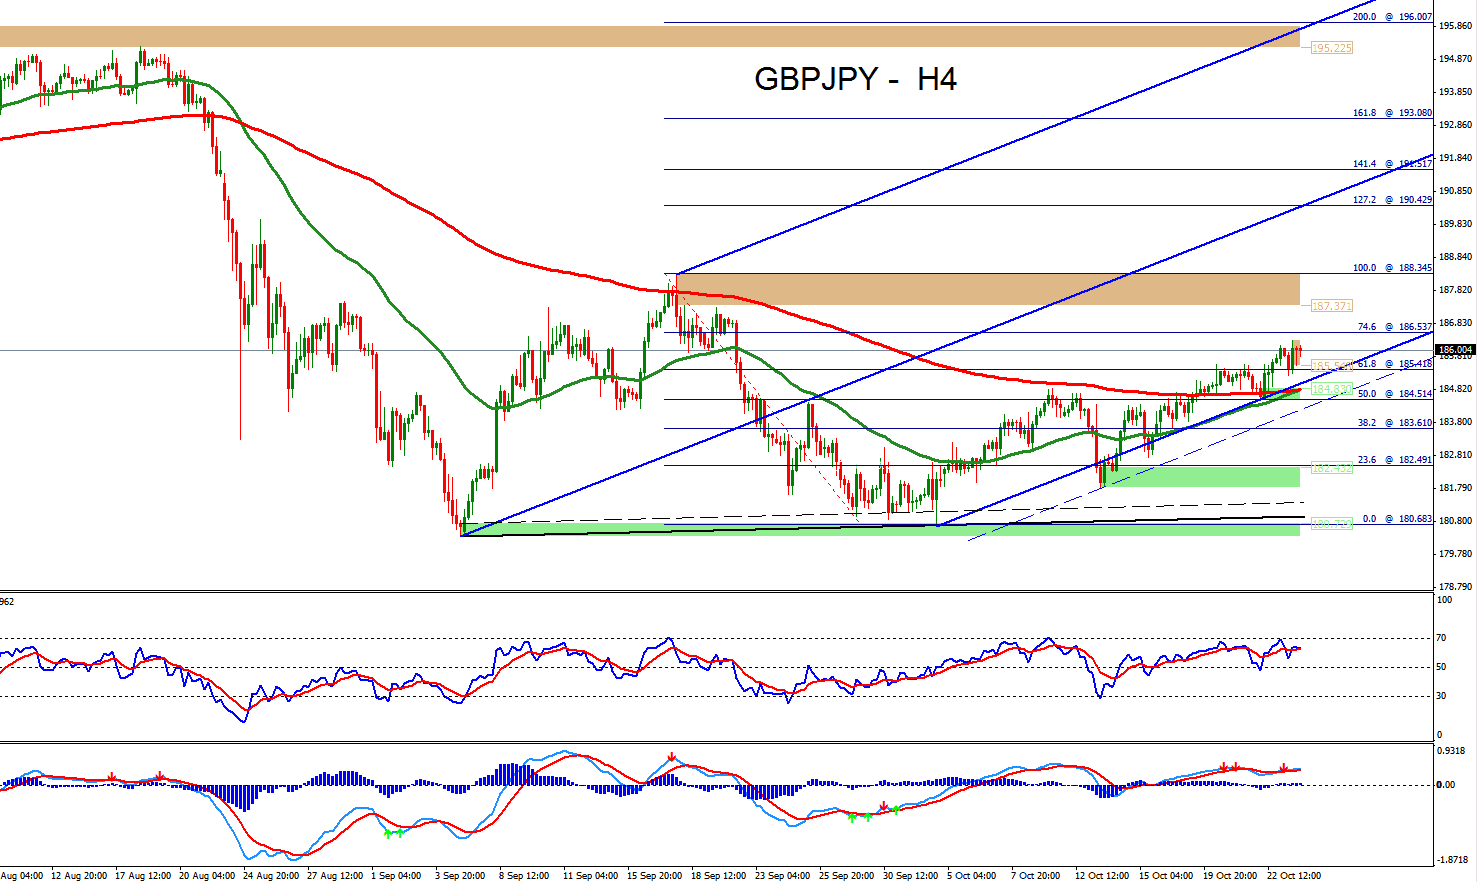 Forex Technical Analysis of GBPJPY for October 26, 2015 | Forex Signals